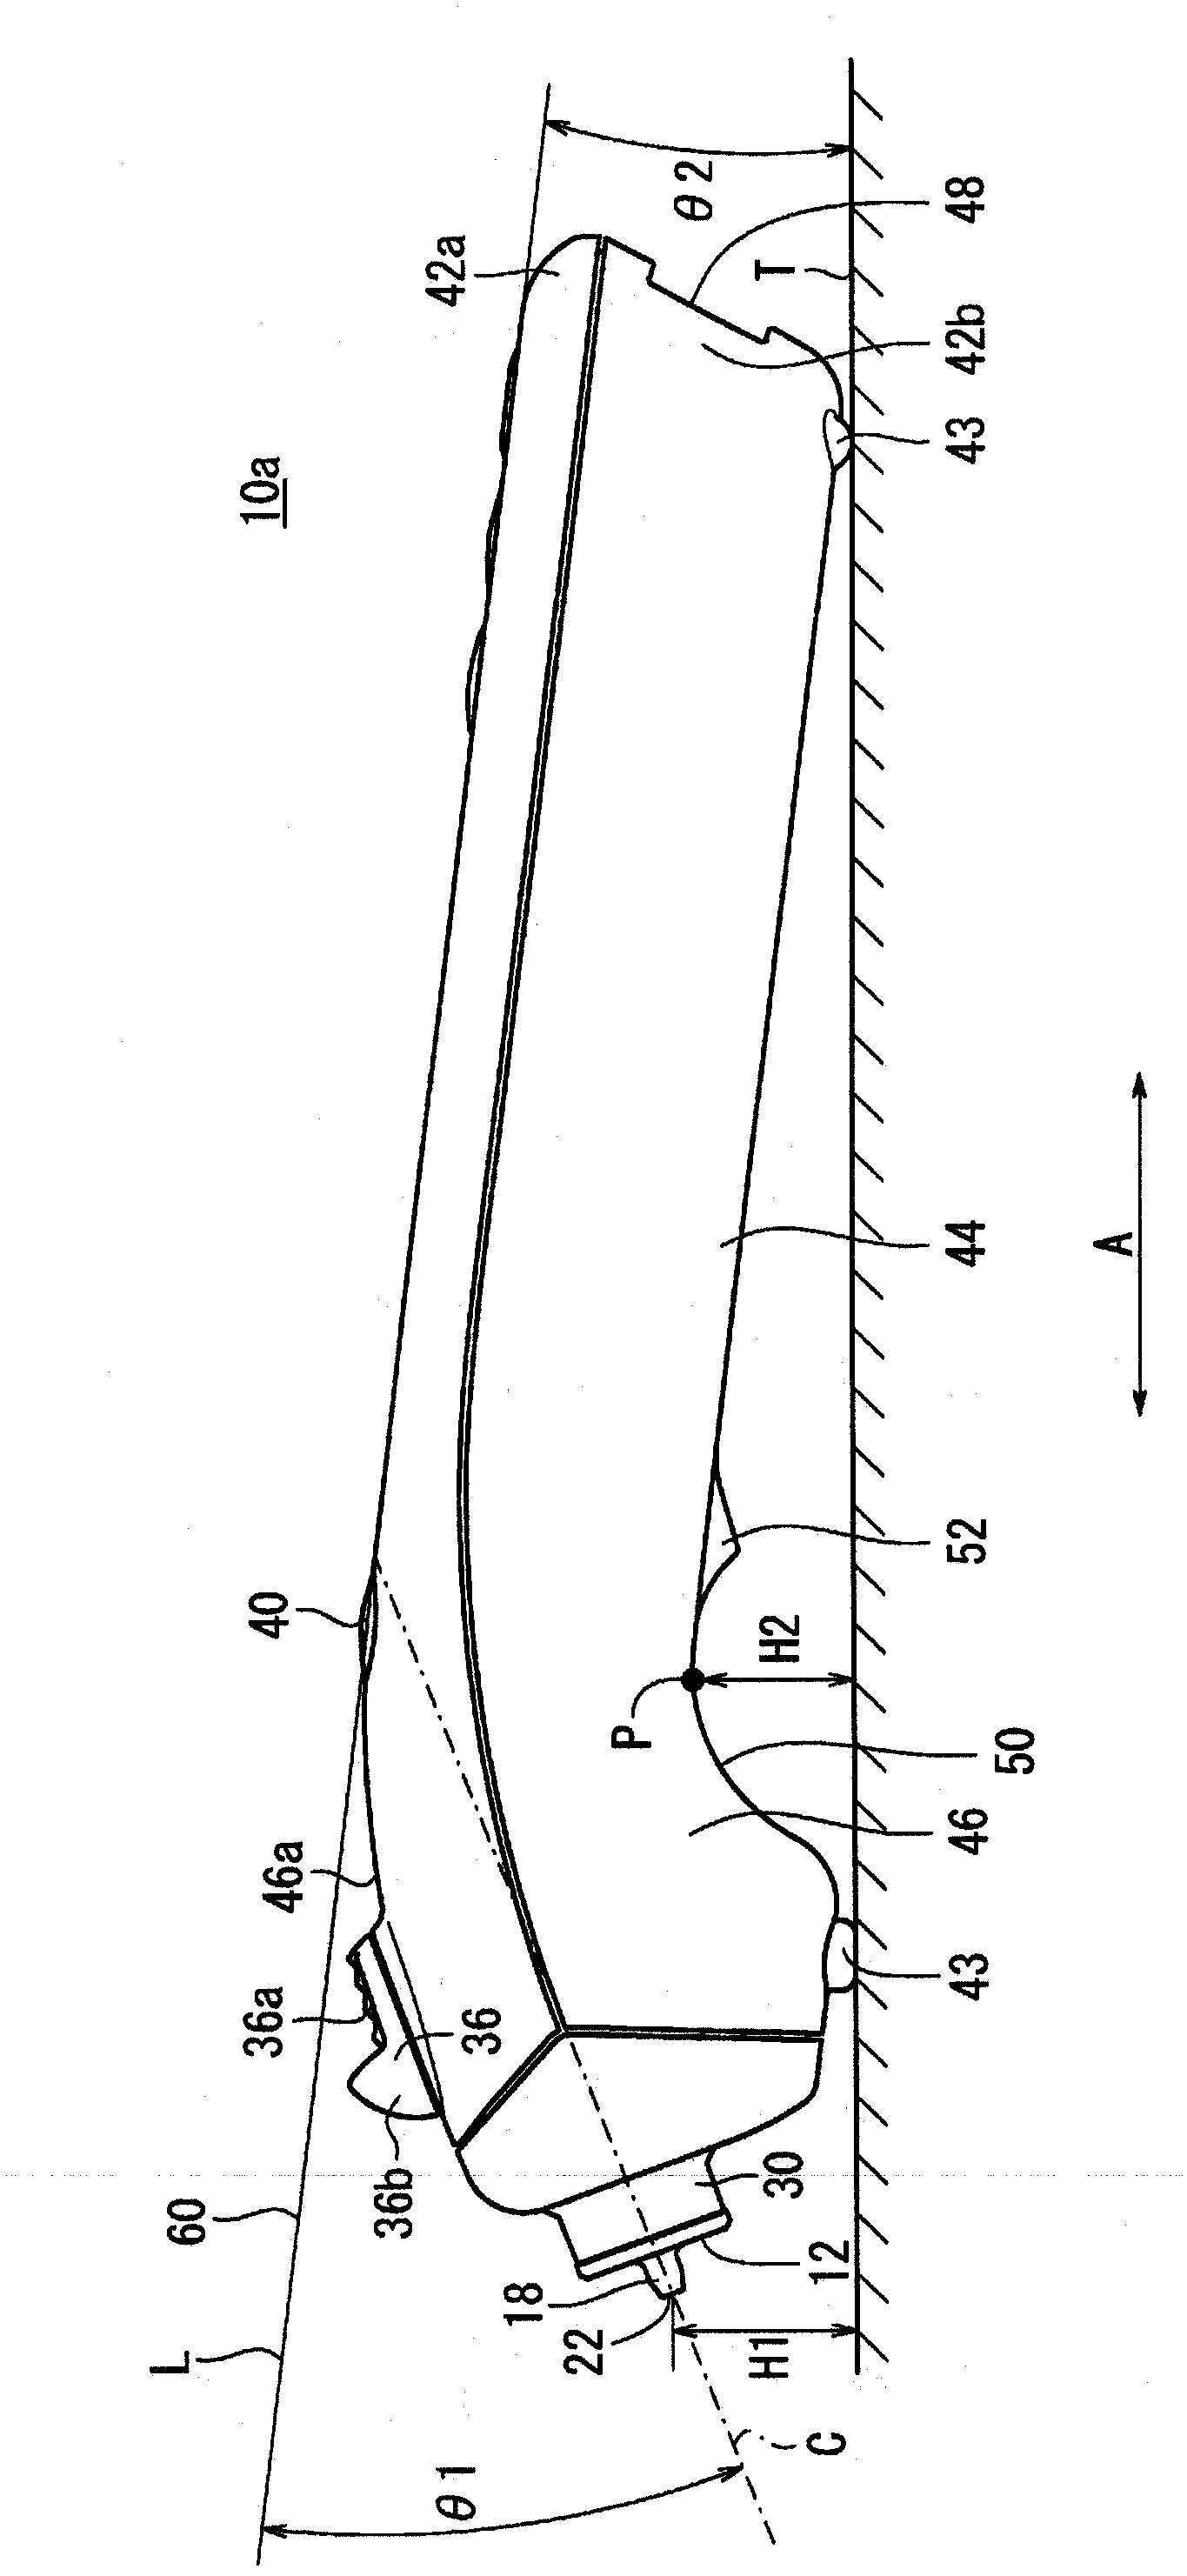 Device for measuring blood component